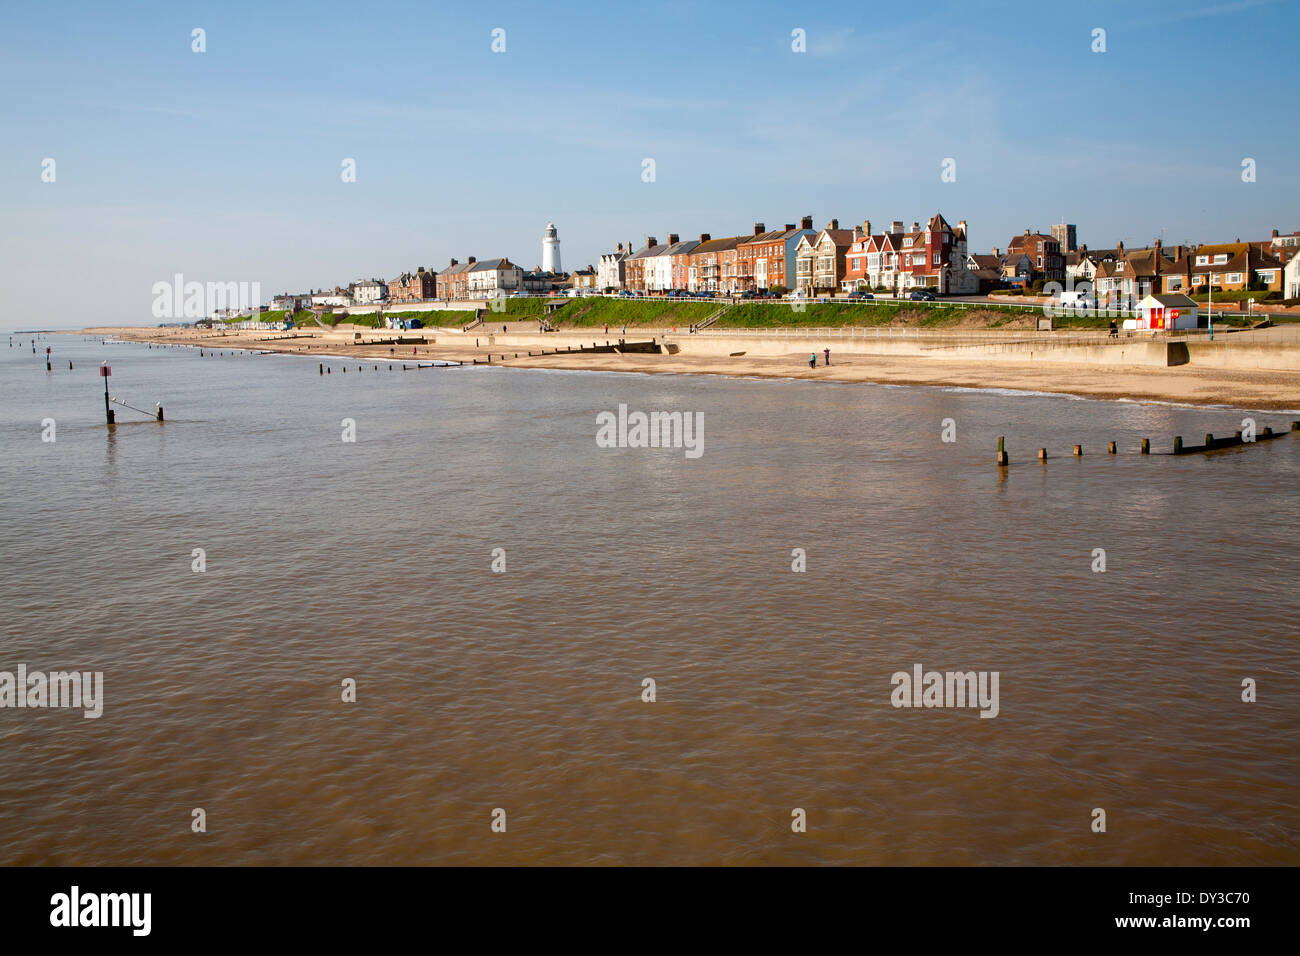 View from the pier of the historic seaside resort town of Southwold, Suffolk, England Stock Photo